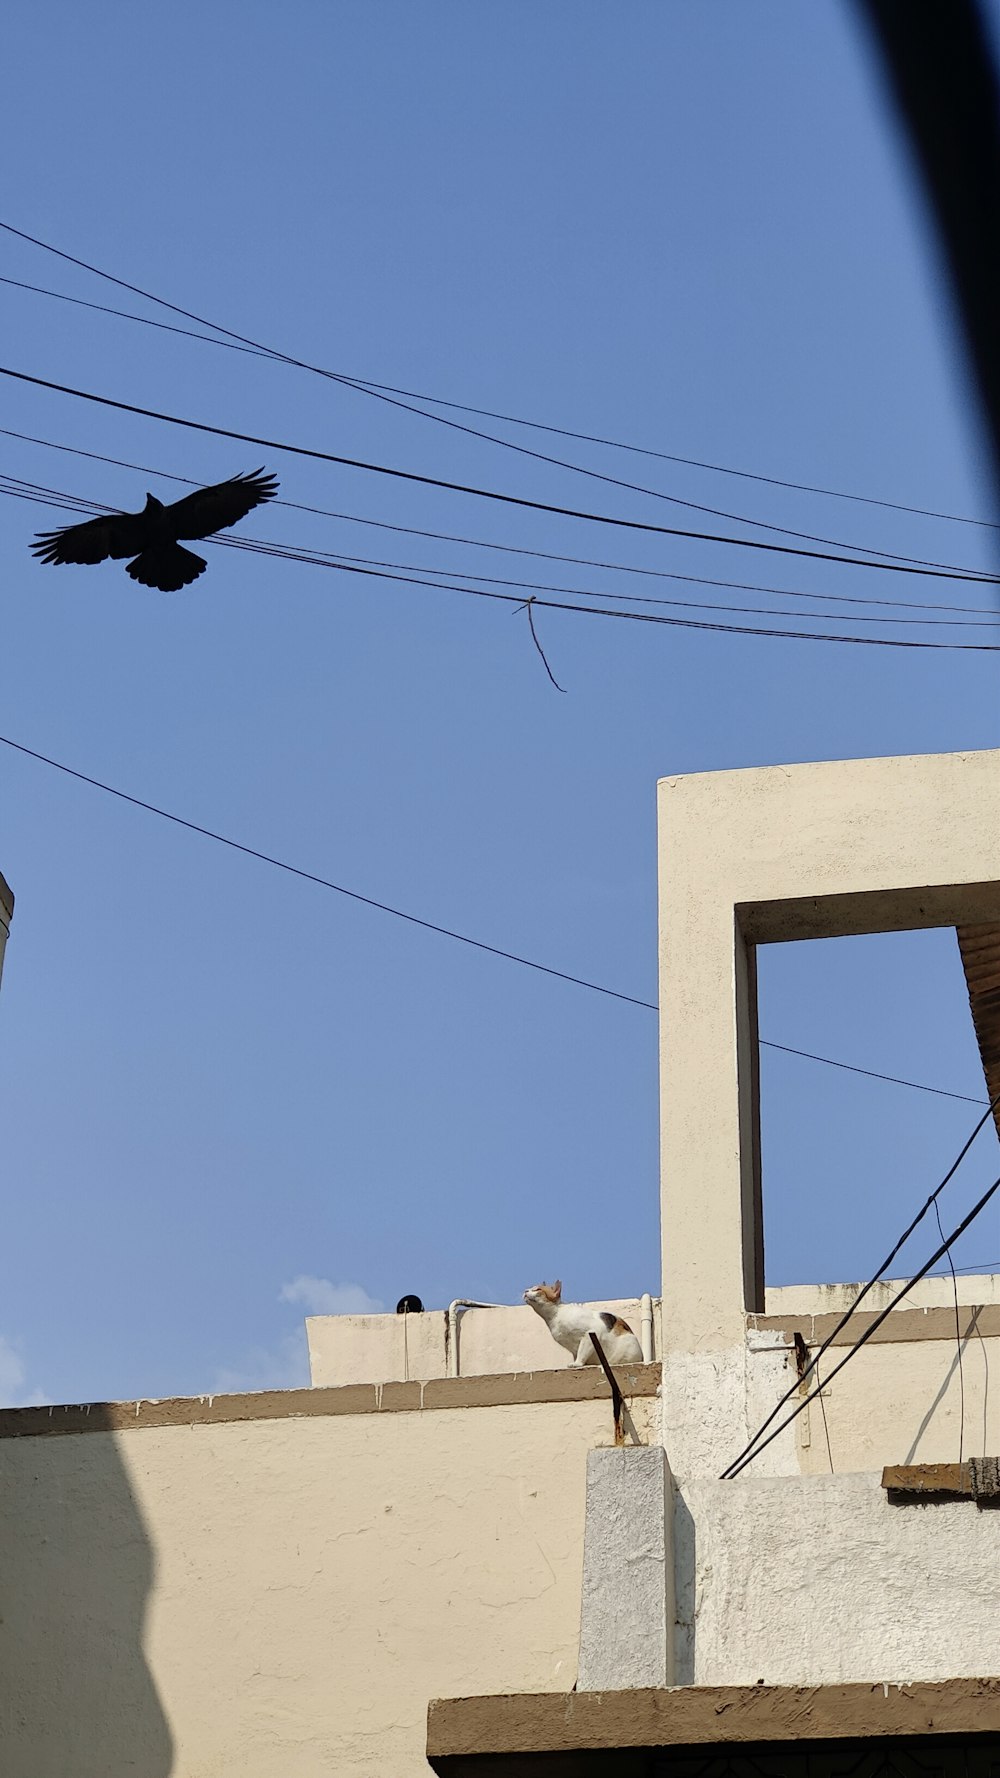 a bird flying over a building with power lines